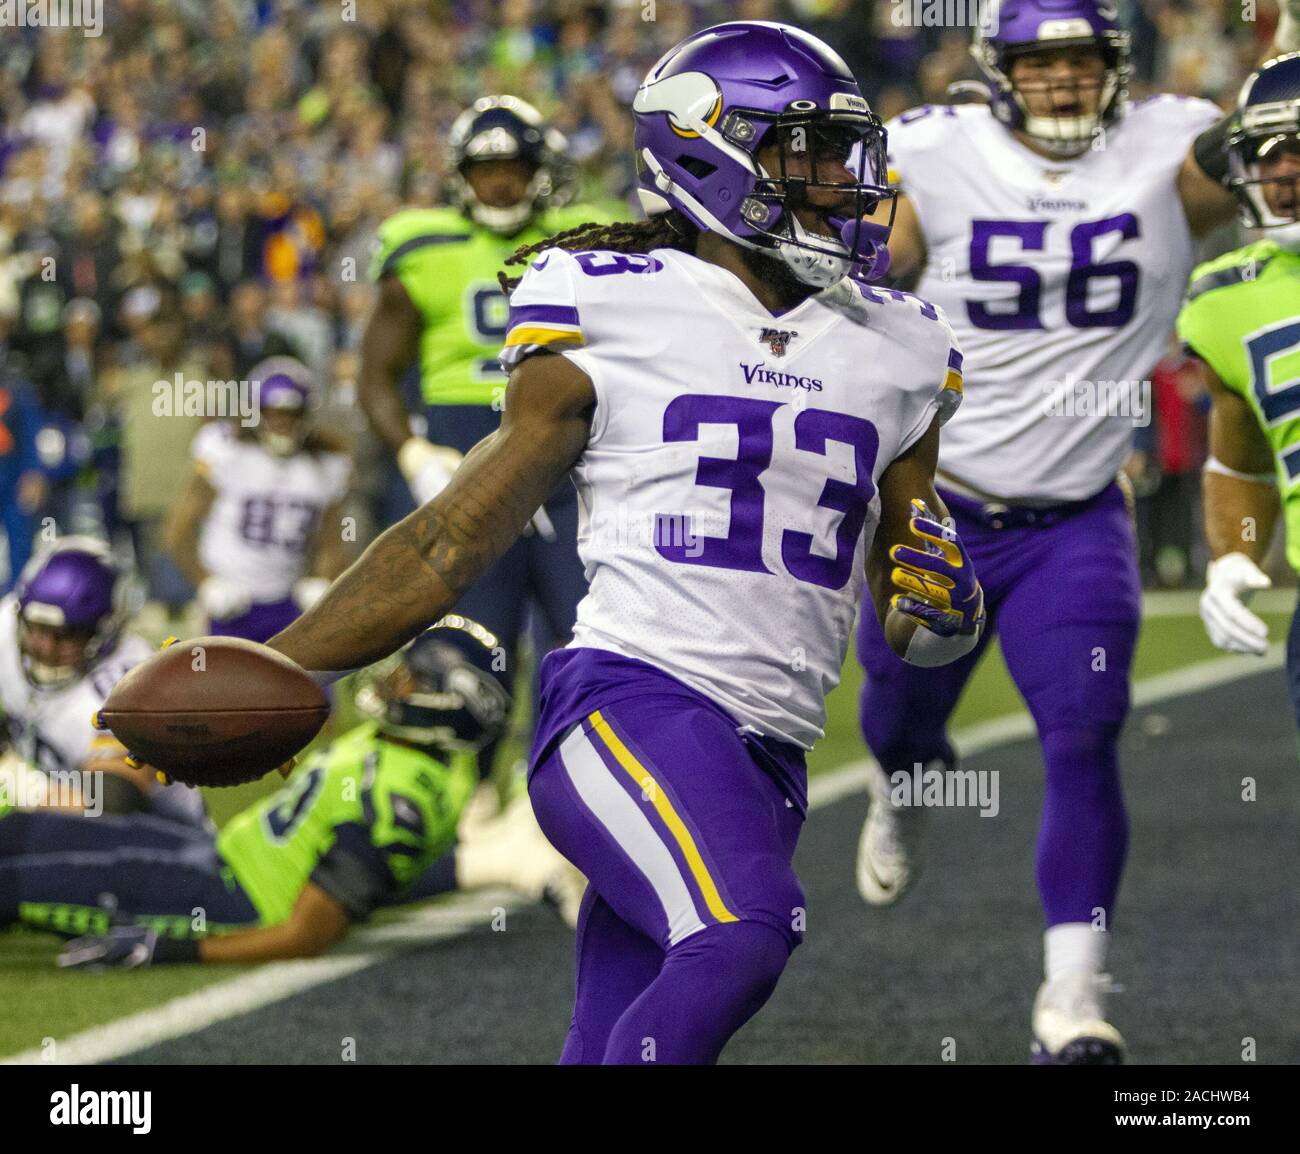 Seattle, United States. 02nd Dec, 2019. Minnesota Vikings running back Dalvin Cook (33) scores a 2 yard touchdown during the first quarter against the Seattle Seahawks at CenturyLink Field in a Monday Night Football game on December 2, 2019 in Seattle, Washington. Photo by Jim Bryant/UPI Credit: UPI/Alamy Live News Stock Photo